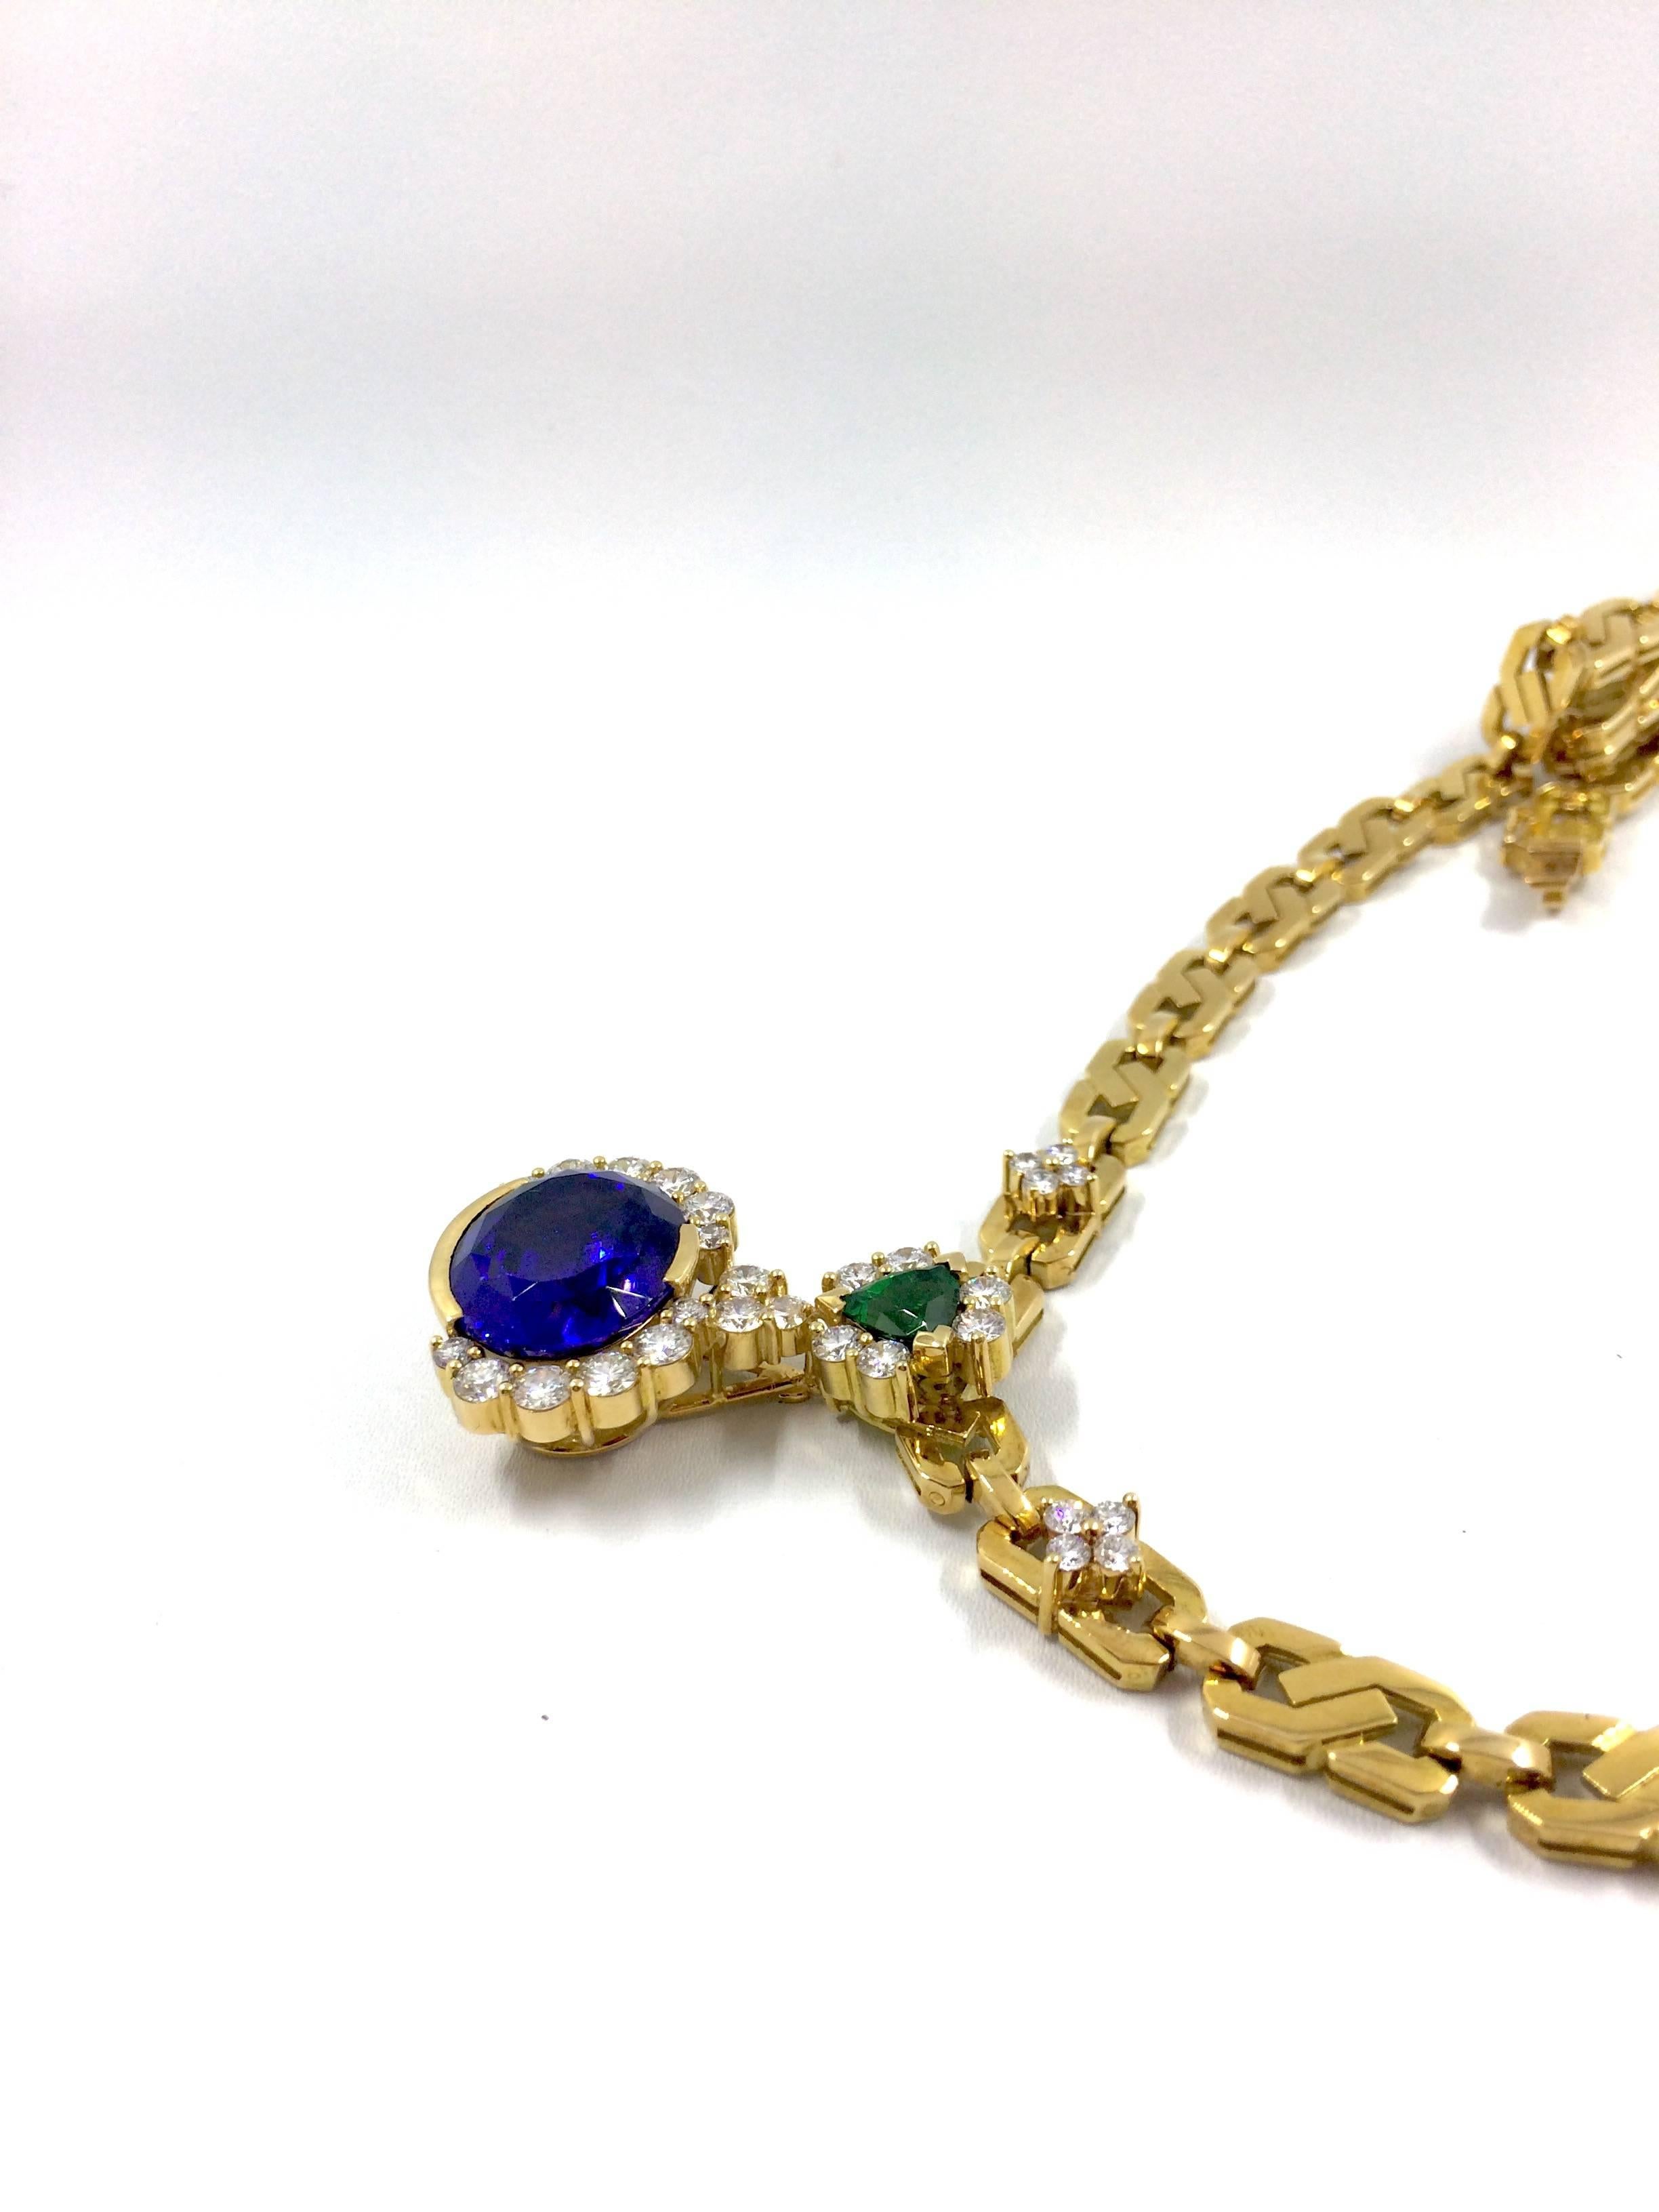  A stunning yellow gold necklace set in the center with an exceptional intense blue tanzanite surmounted by a tsavorite and surrounded with 29 brilliant cut diamonds. The necklace is an unique creation entirely handmade.
Tanzanite Weight: 16.88